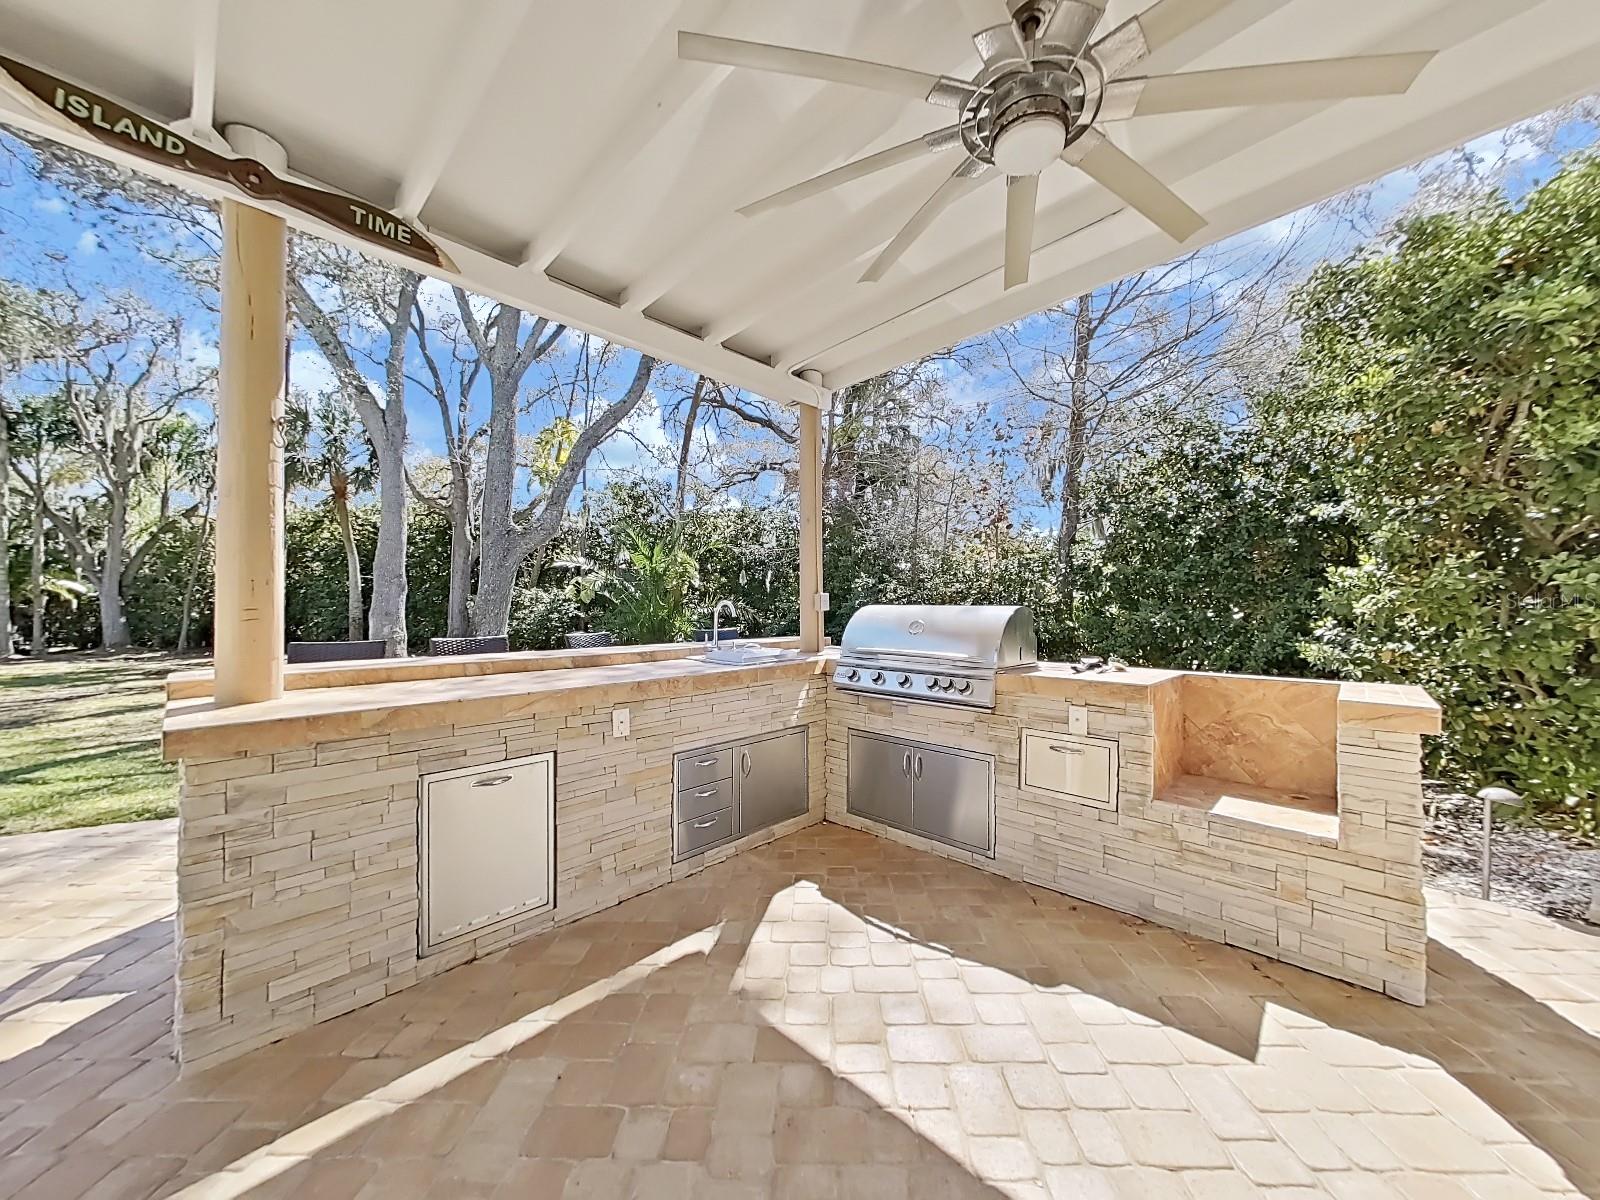 Covered Outdoor kitchen